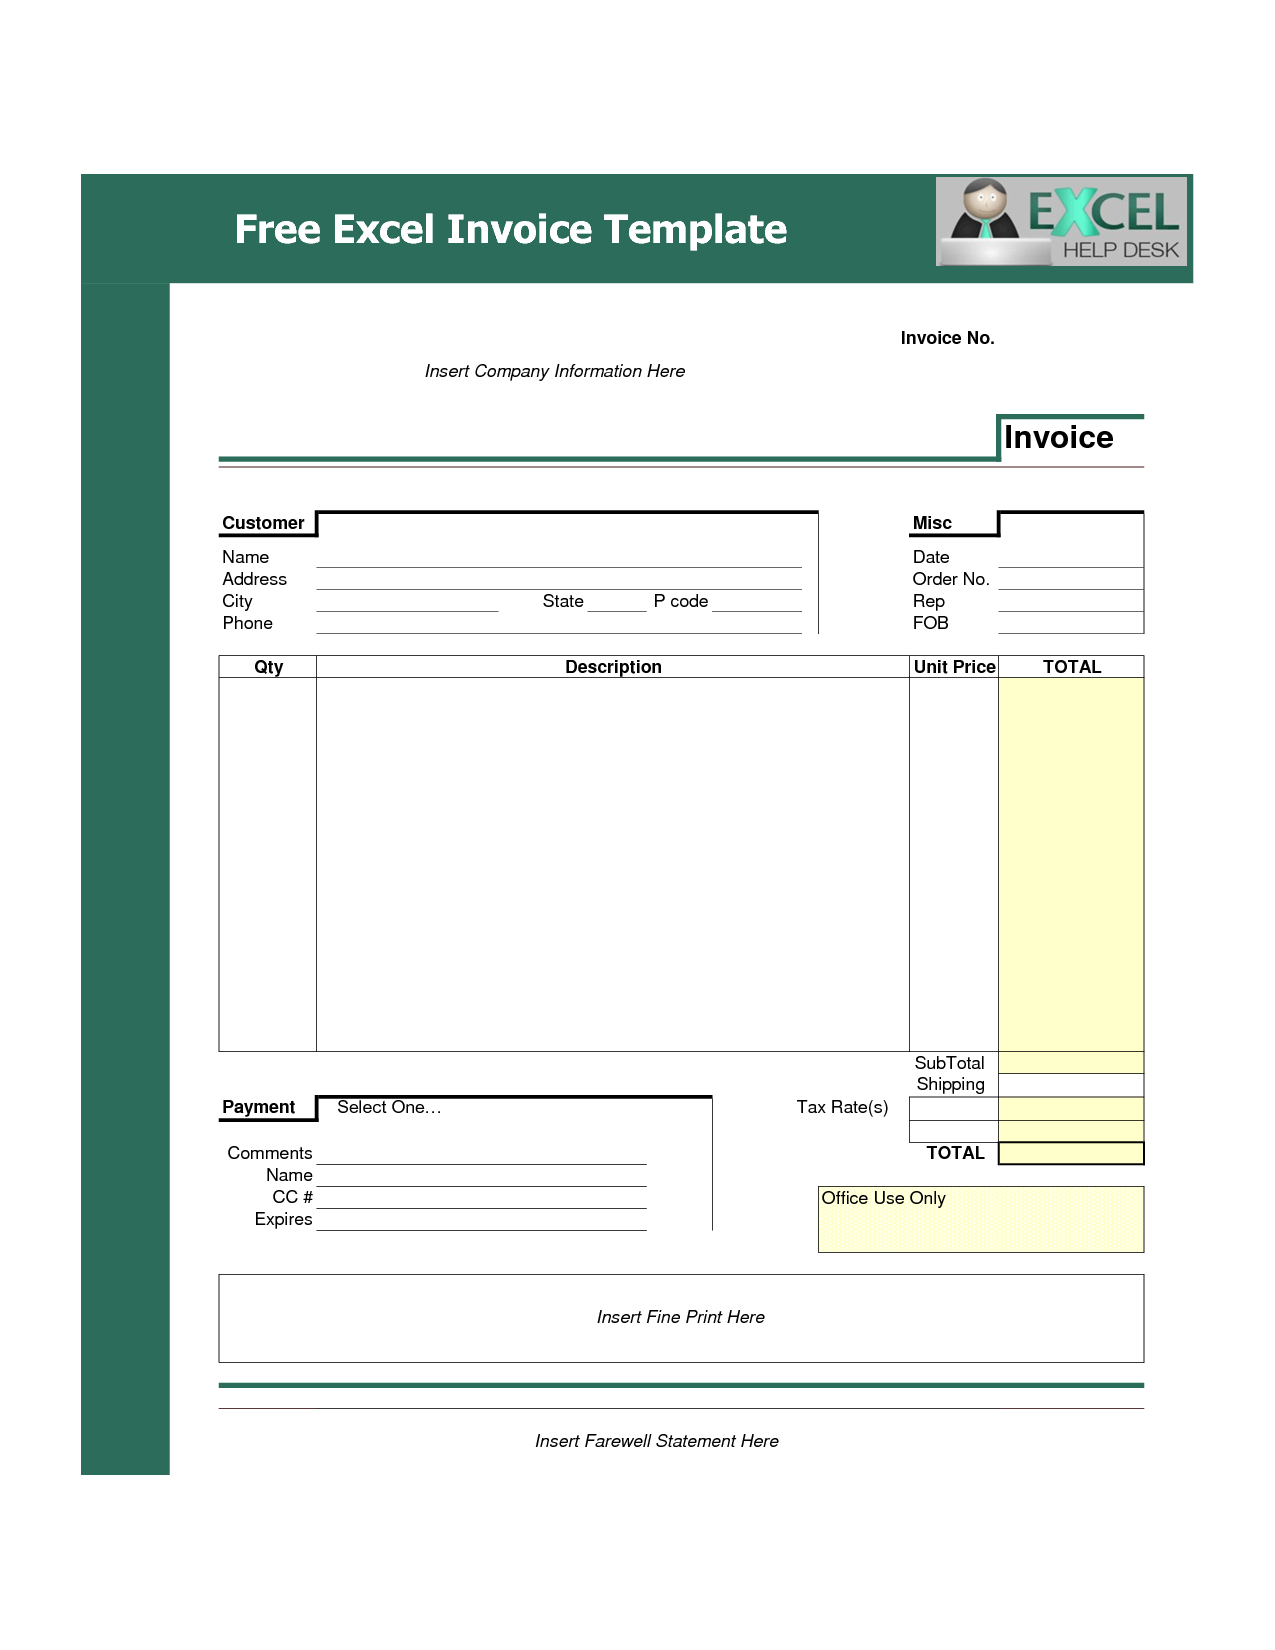 invoice-template-excel-free-download-free-spreadsheet-excel-spreadsheet